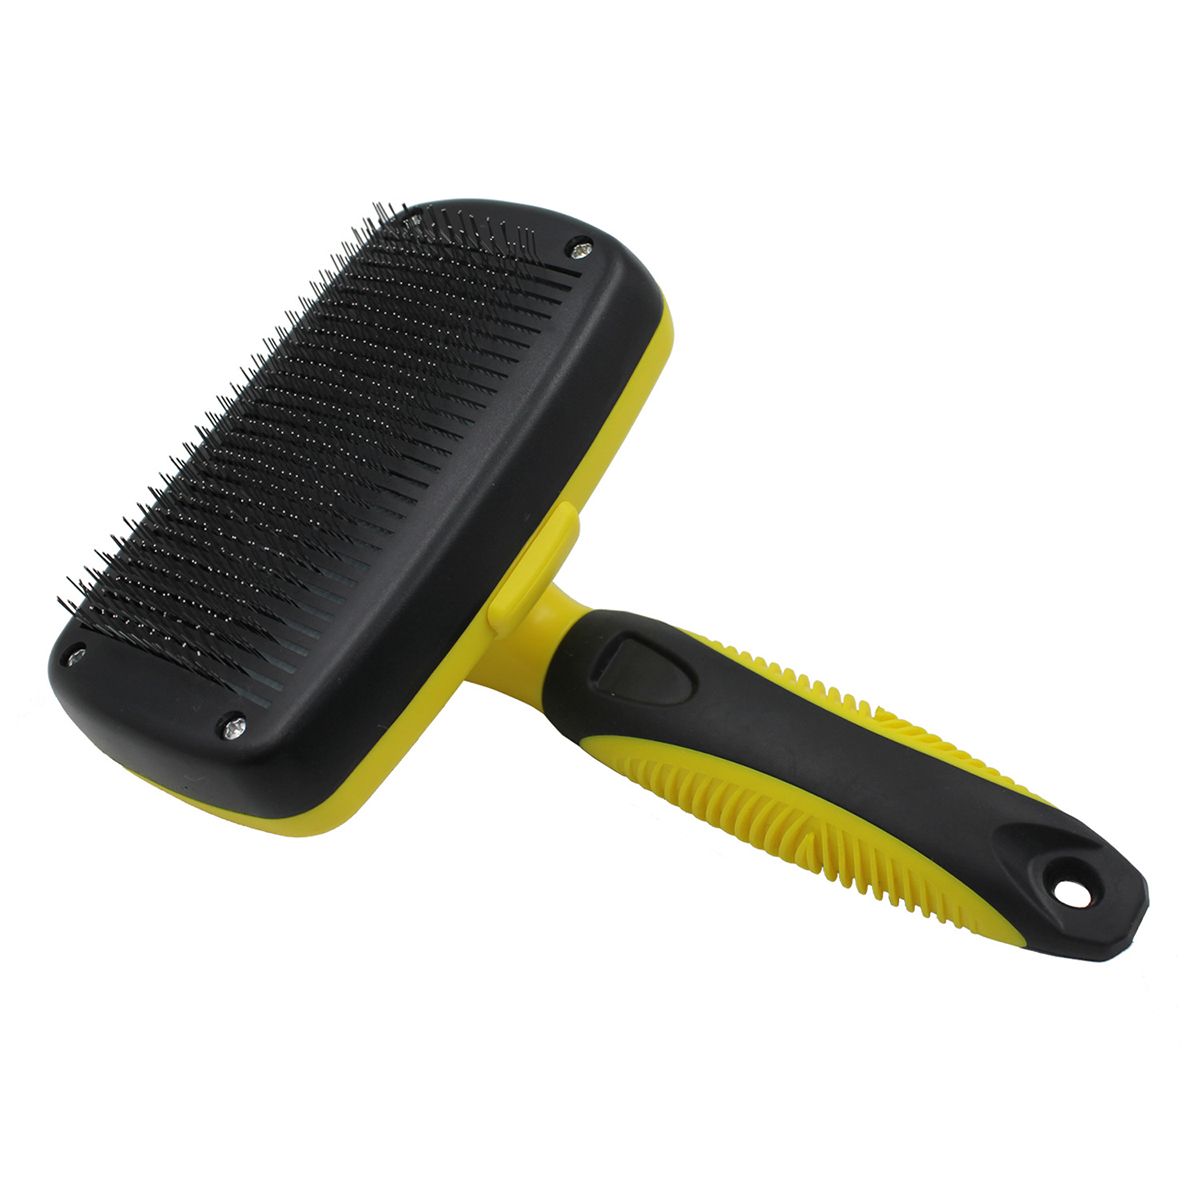 Dog-Hair-Brush-Pet-Comb-handheld-Handle-Double-Sided-Open-Knot-Comb-Slicker-Hair-1574786